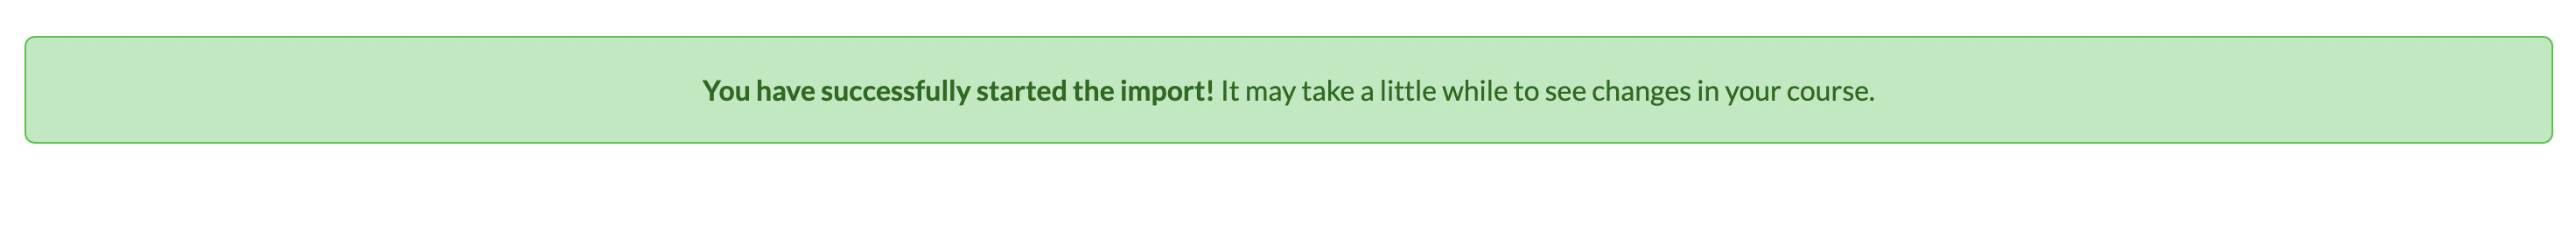 Screenshot of message in a green box reading "You have successfully started the import. It may take a little while to see the changes in your course."